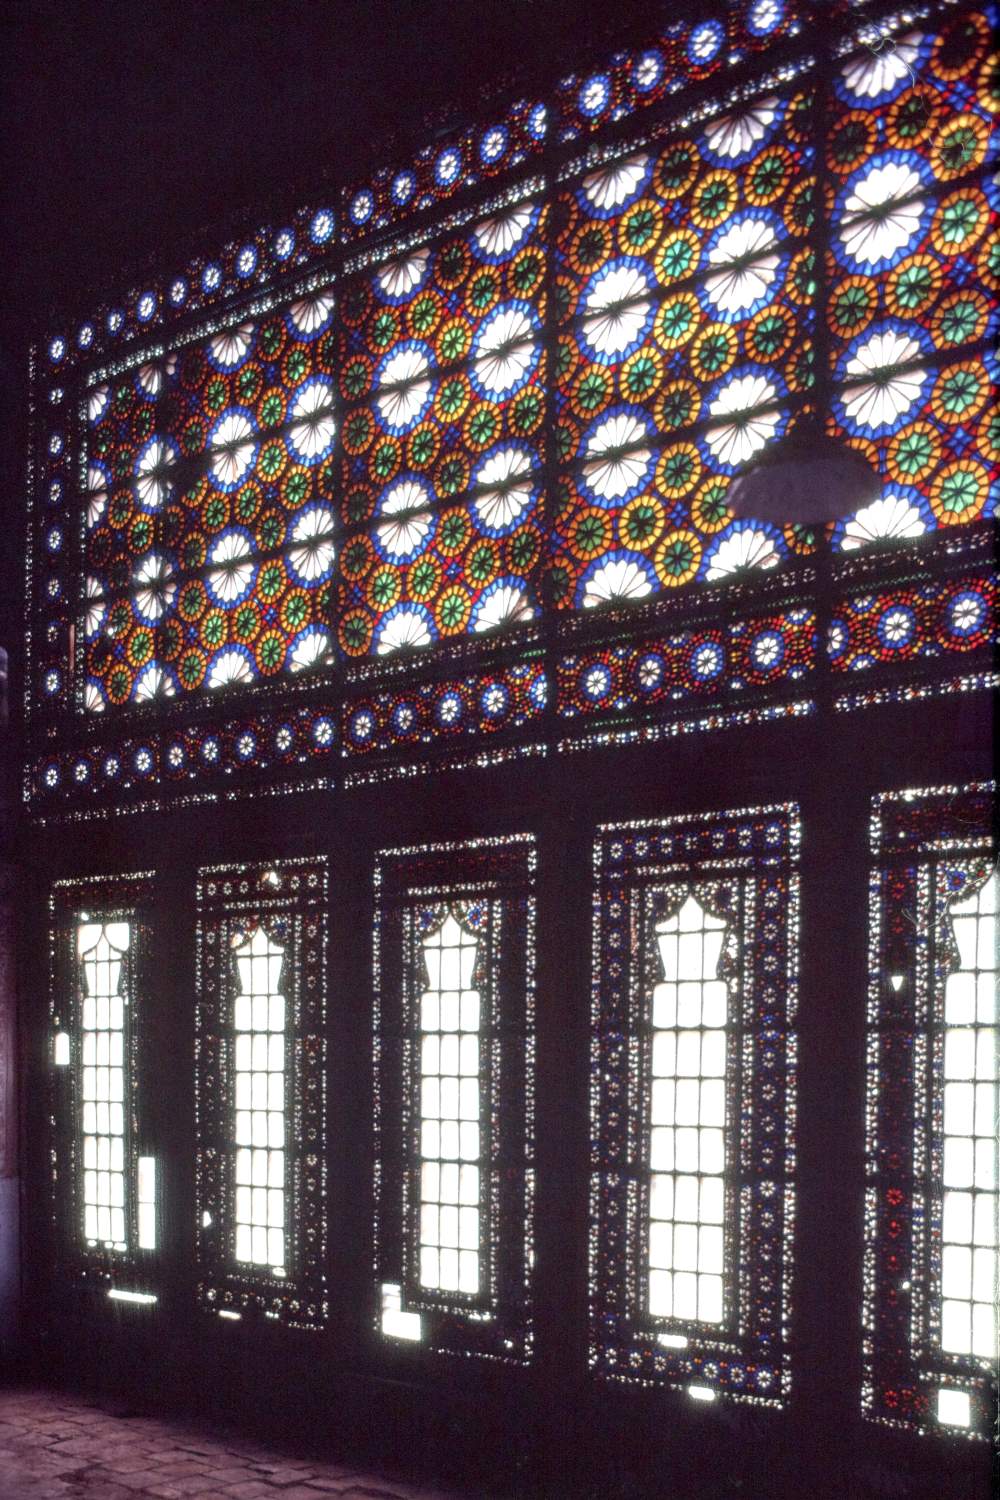 Interior view of windows in main reception room overlooking courtyard.